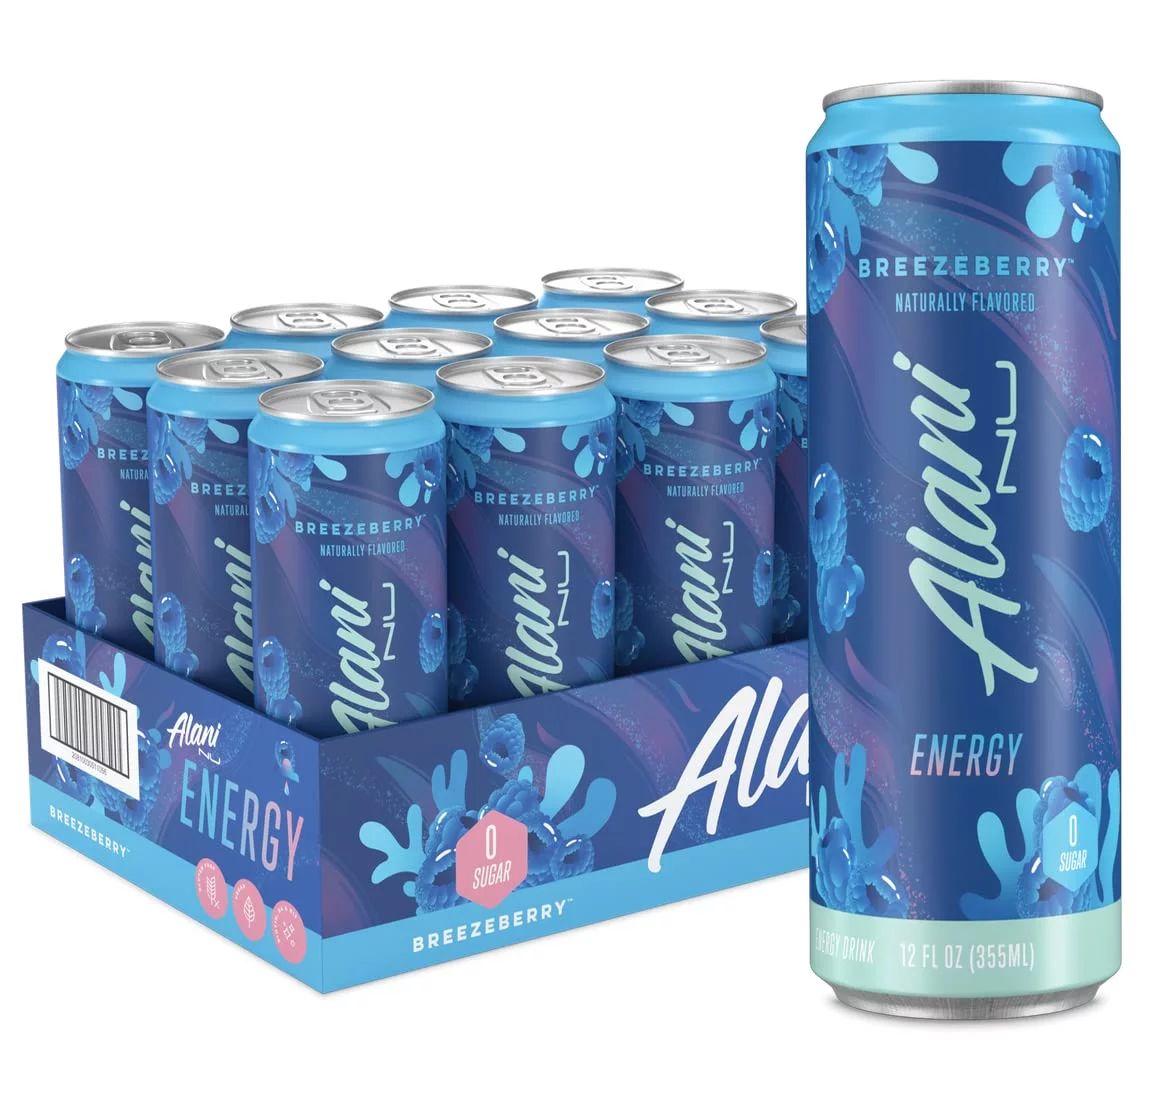 Alani Nu Sugar-Free Energy Drink, Pre-Workout Performance, Breezeberry, 12 oz Cans (Pack of 12) | Walmart (US)